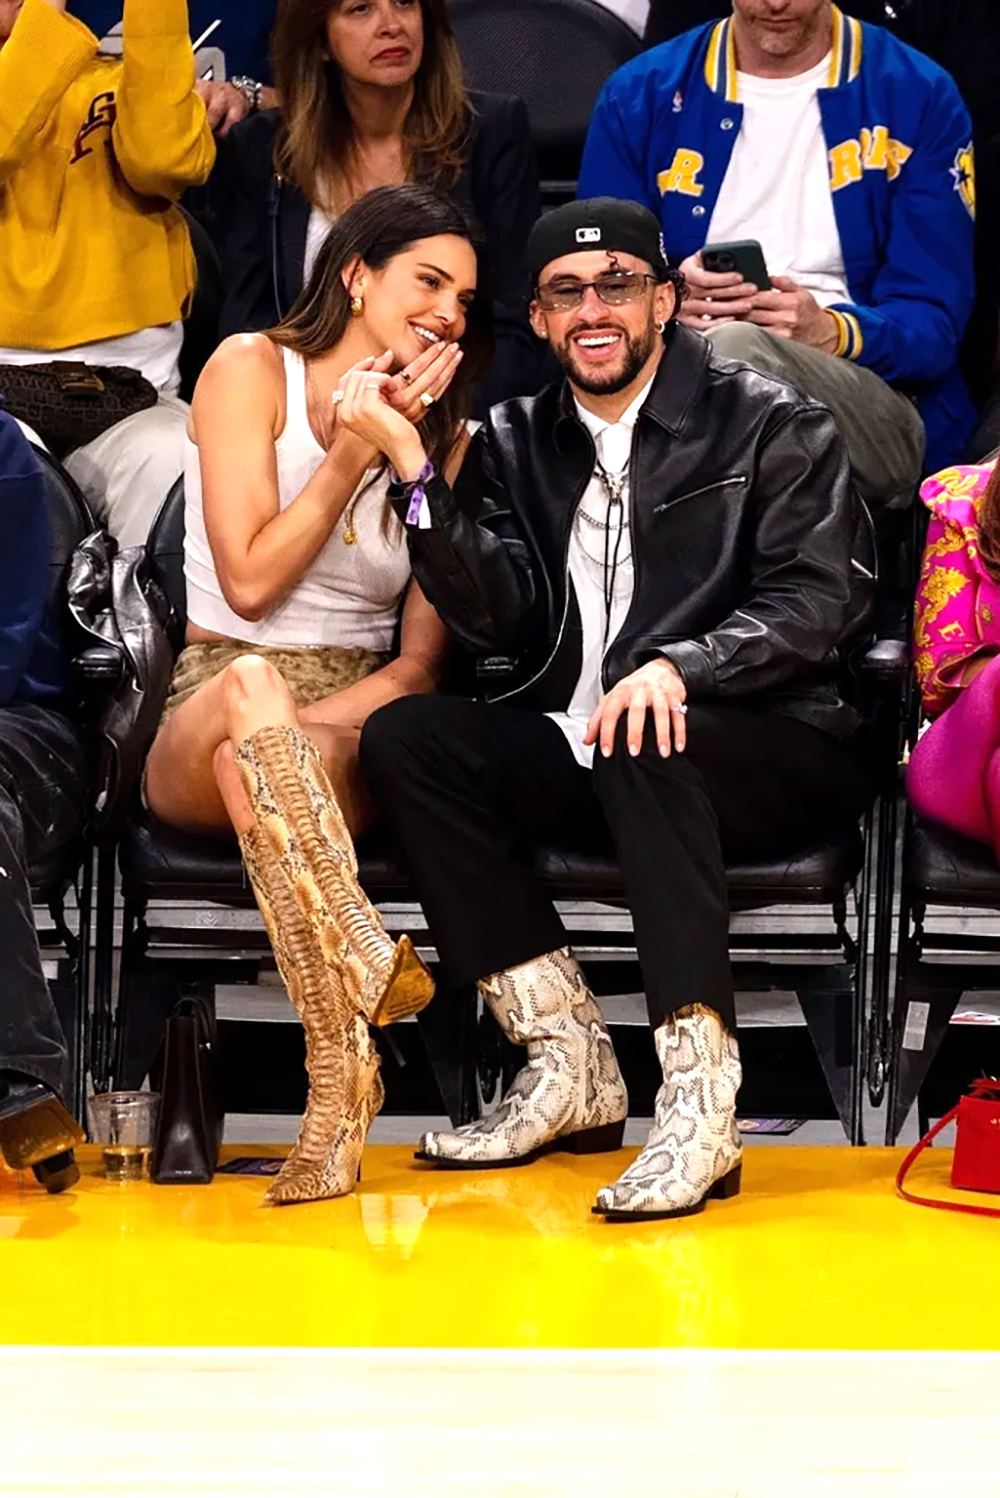 Kendall Jenner and Bad Bunny sparked dating rumors in February 2023 & since then the couple has been going strong. They’re pictured here at the Lakers vs Golden State game in Los Angeles.